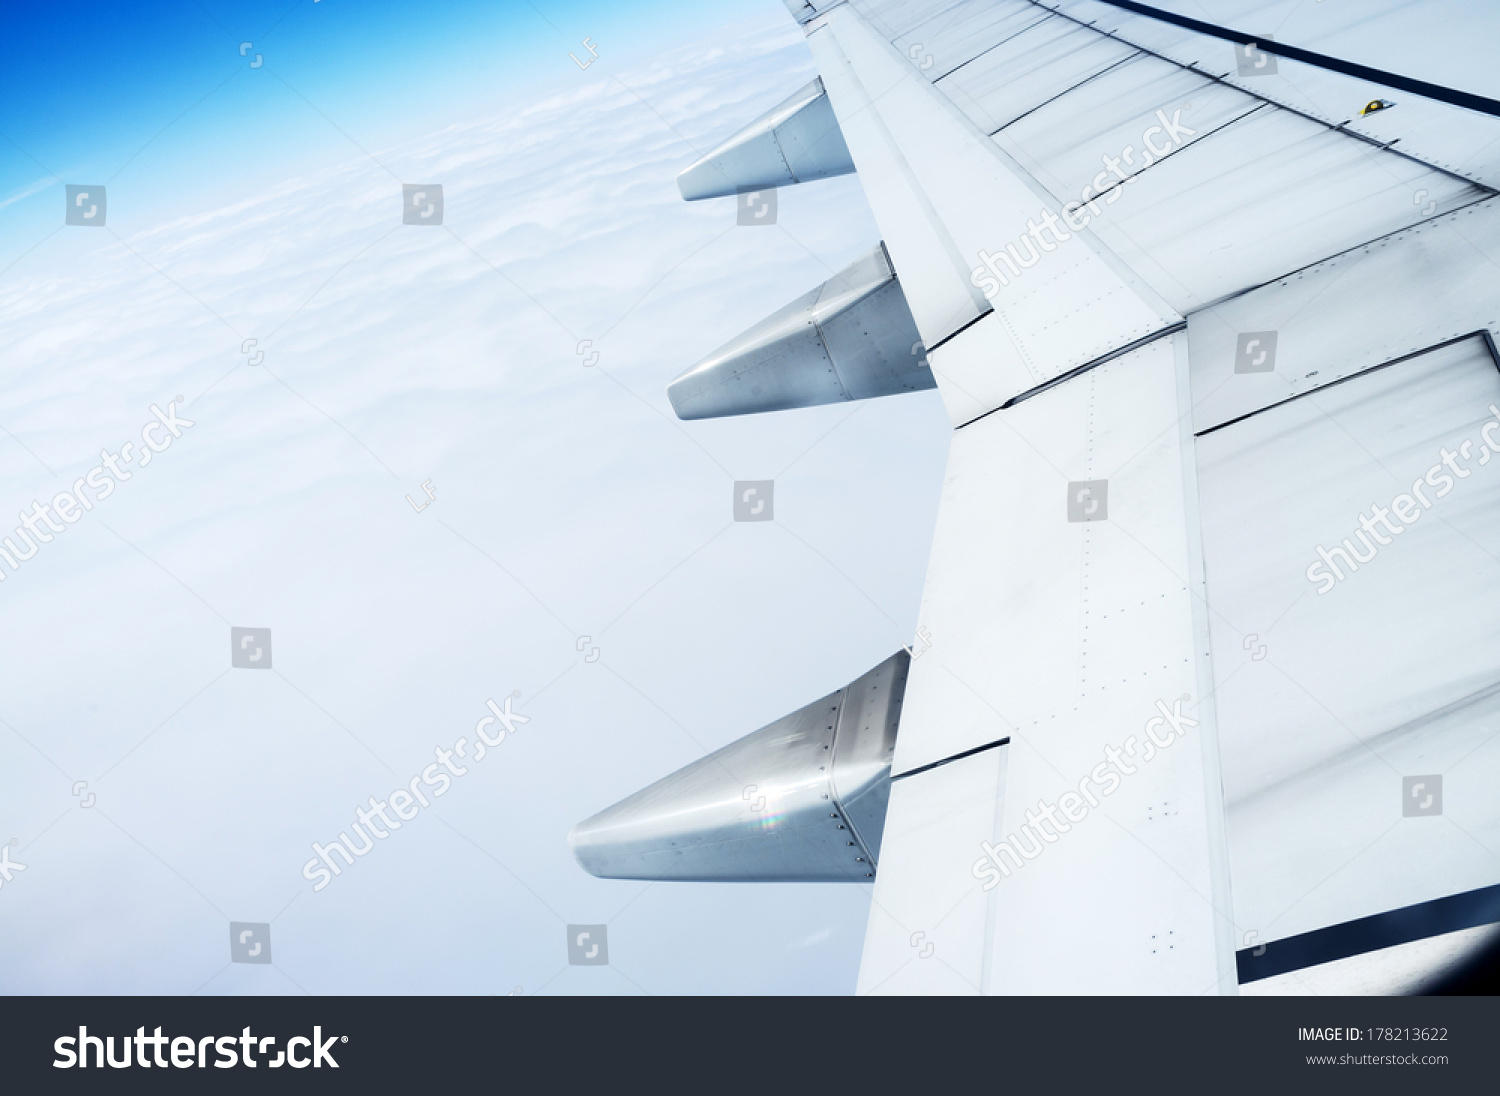 The plane's wings, the background is blue sky, taken from the cabin #178213622